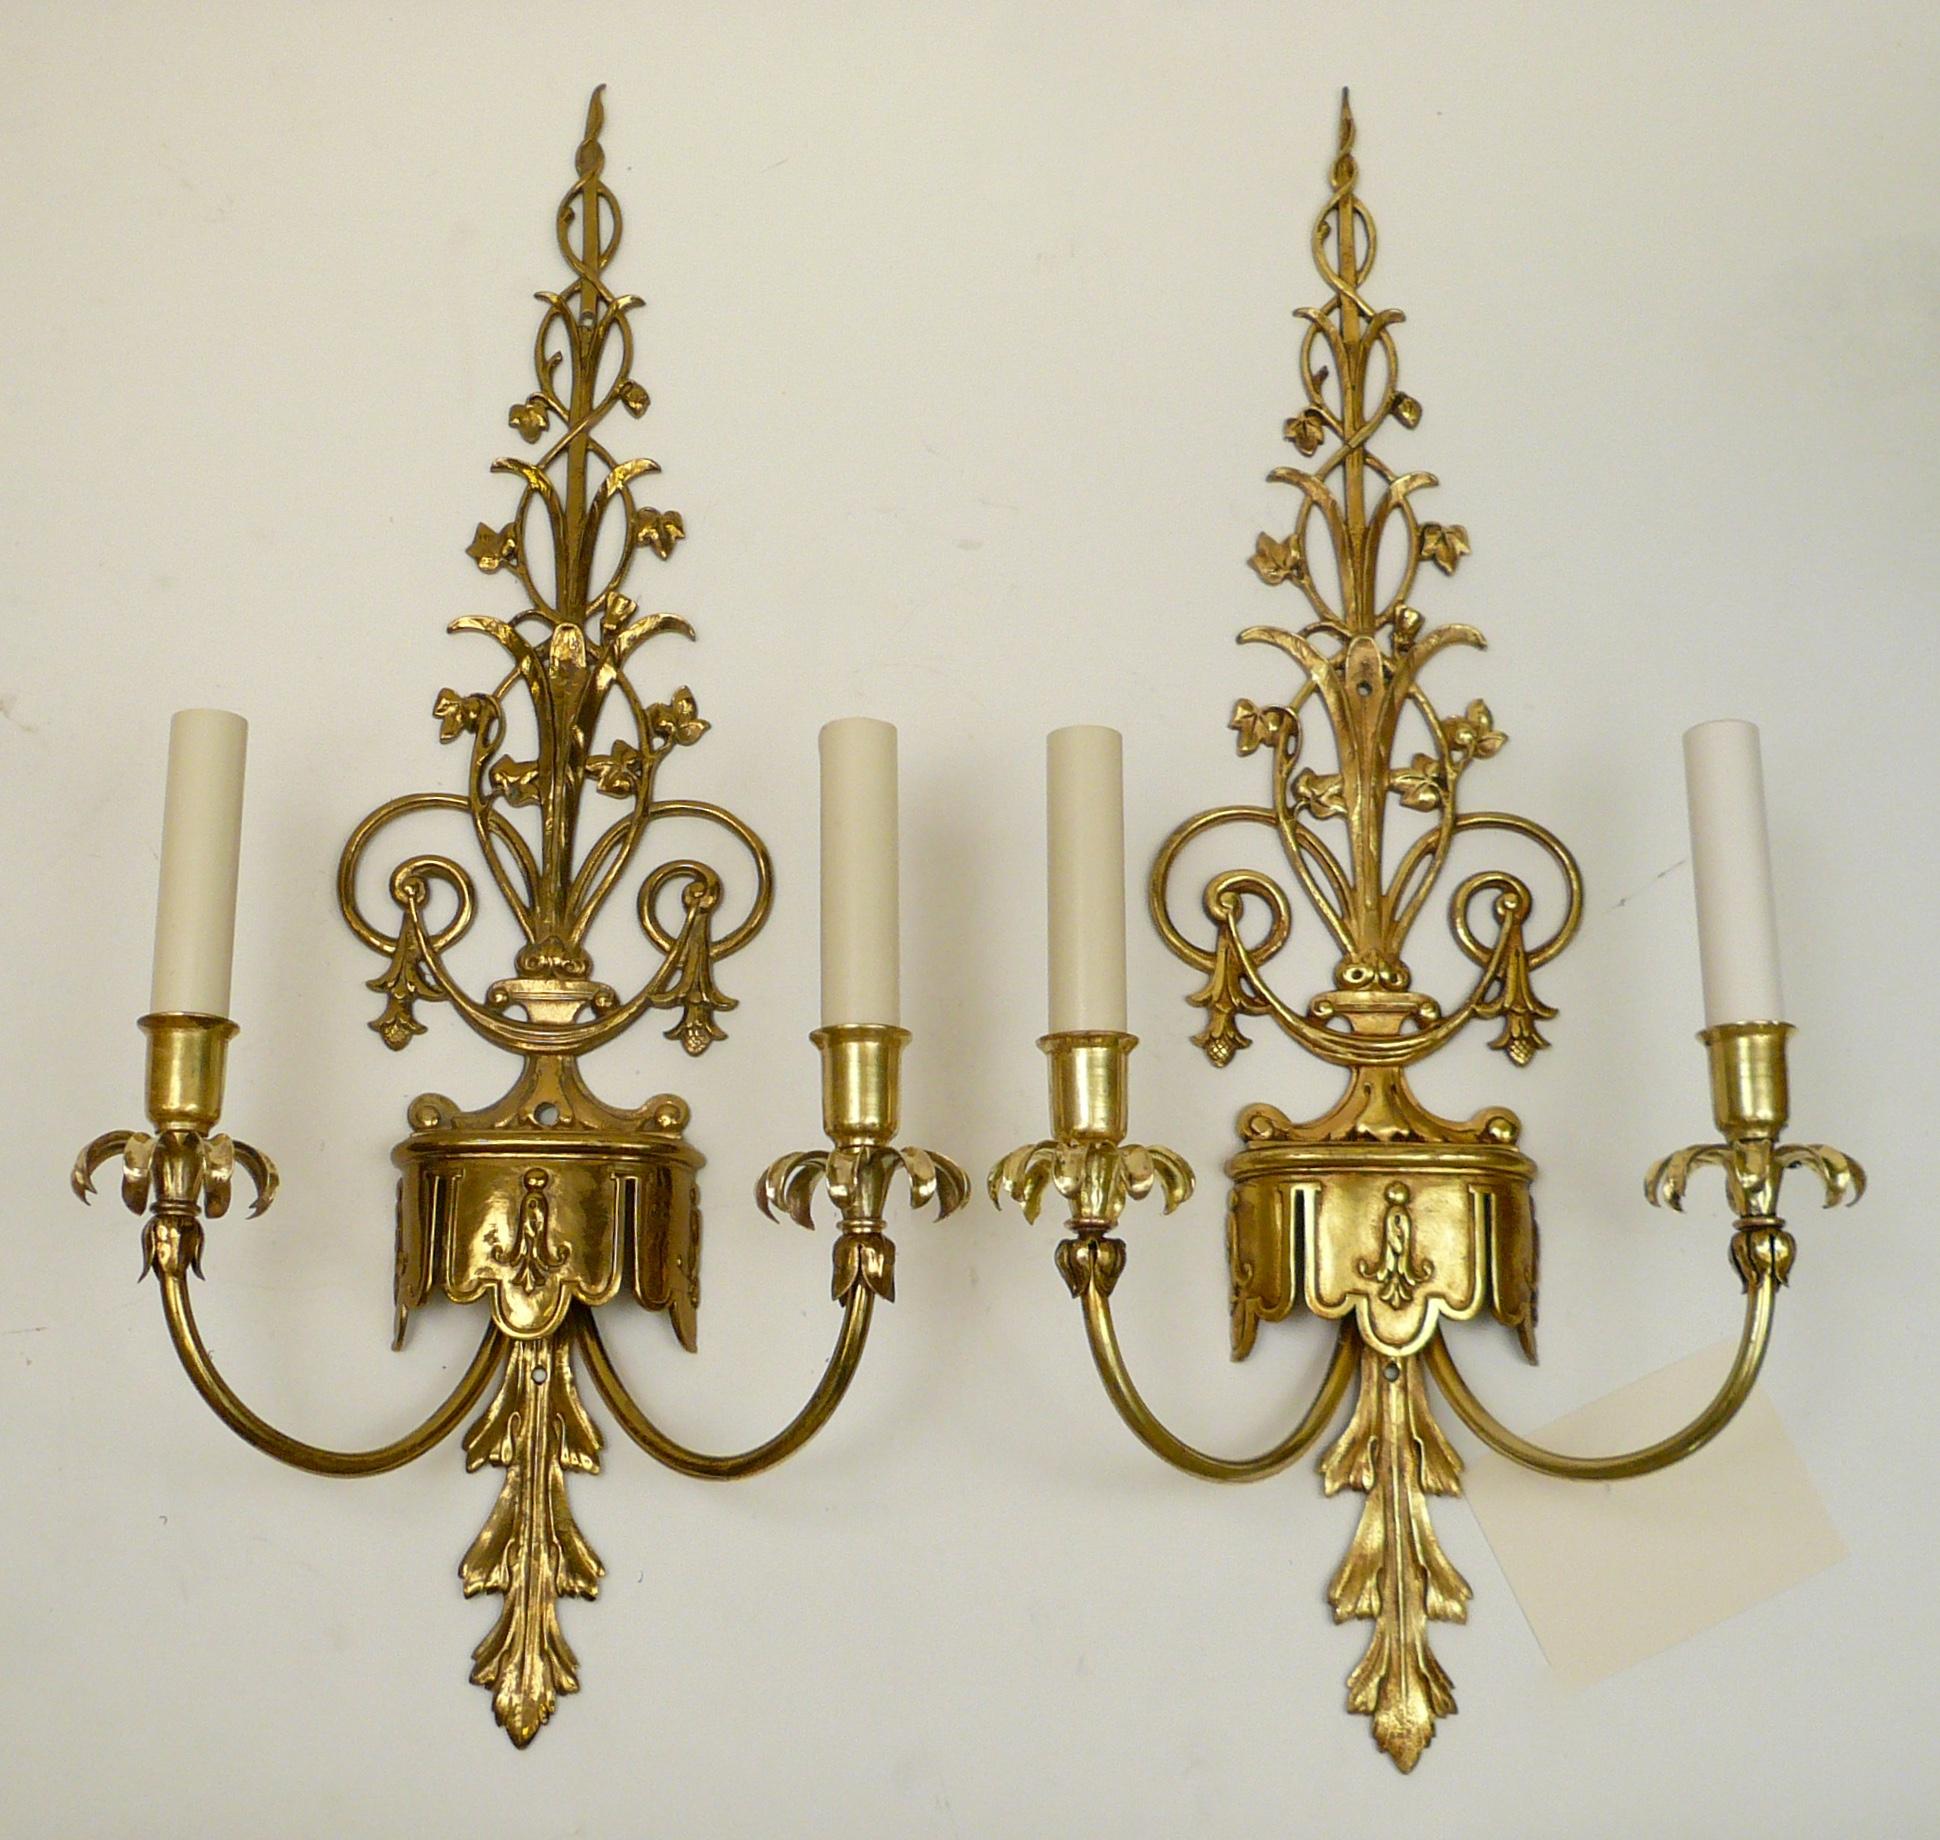 This handsome pair of cast and burnished brass sconces feature Robert Adam style neoclassical motifs including acanthus leaves, and bellflowers.